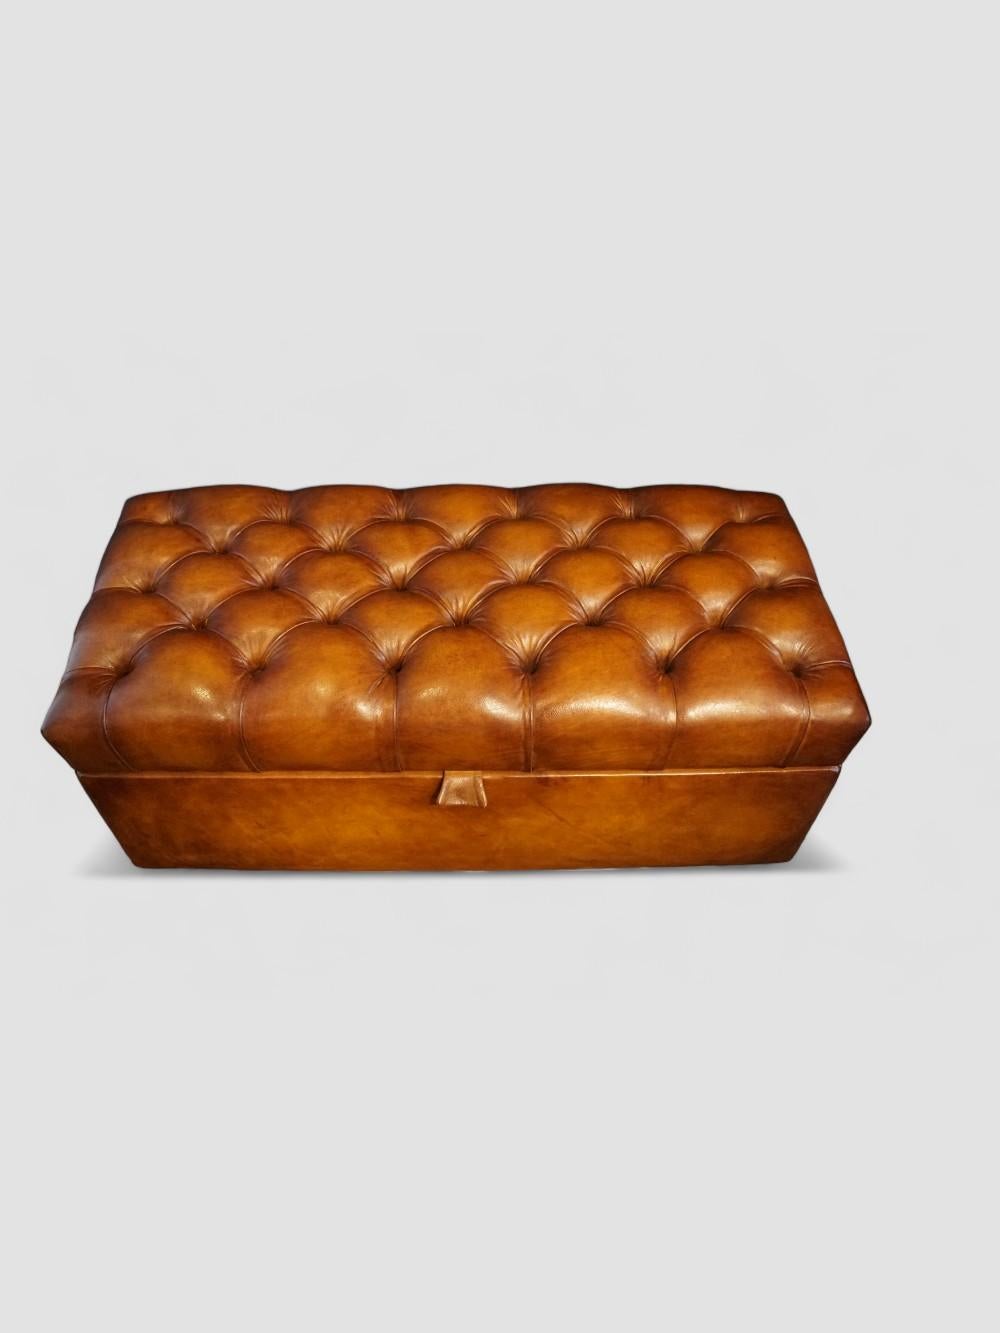 Leather Victorian leather Chesterfield ottoman chest